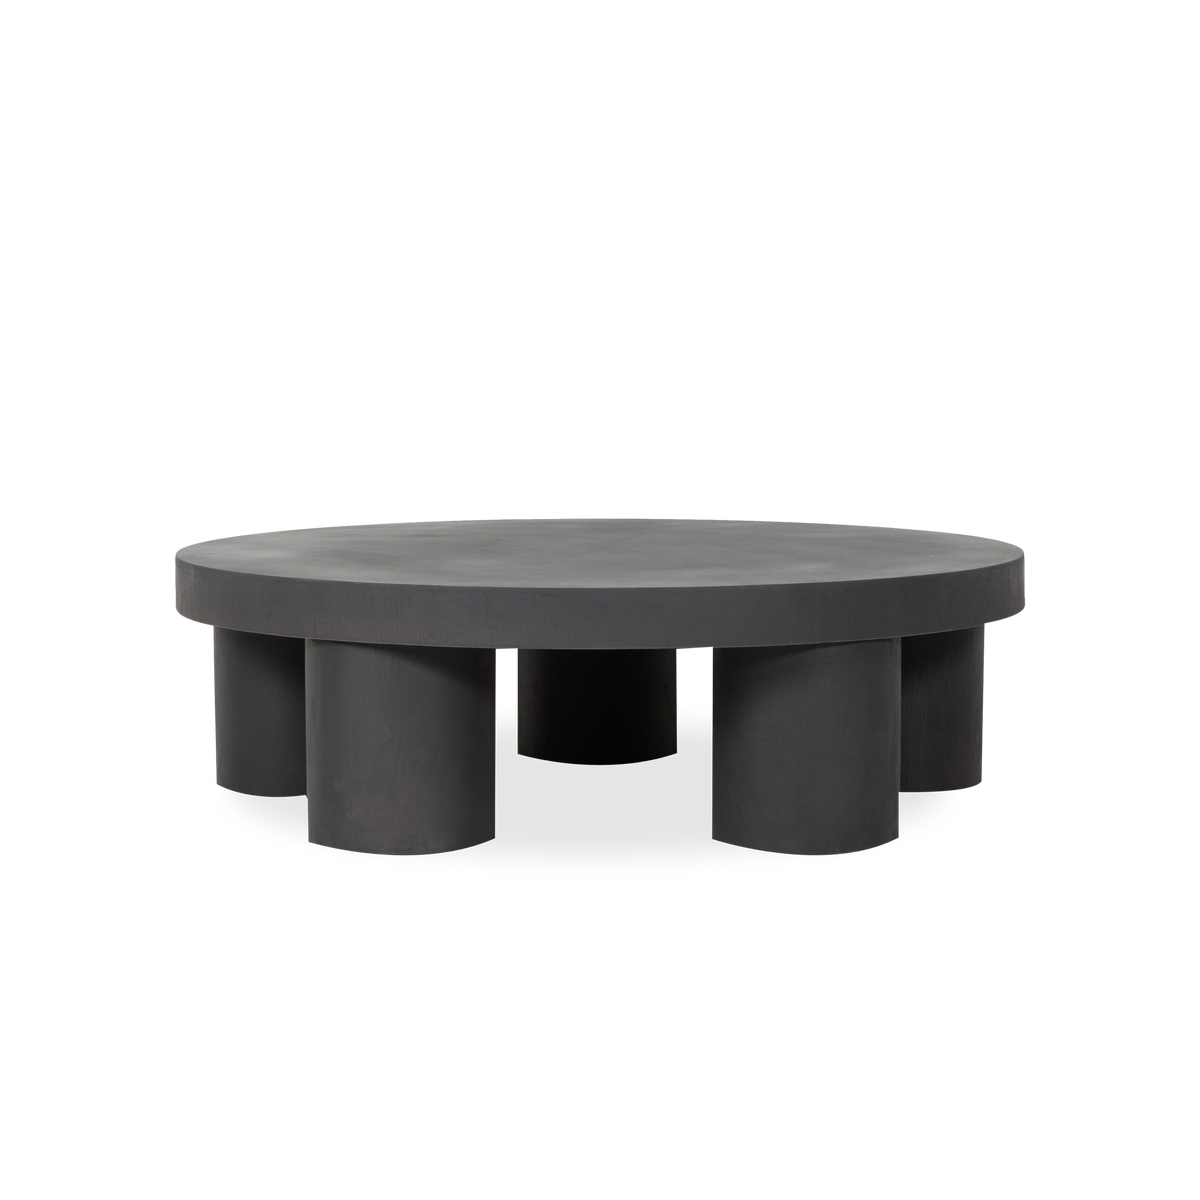 Taking cues from the raw aesthetic of brutalist design, the Pillar Coffee Table is meticulously molded from concrete.